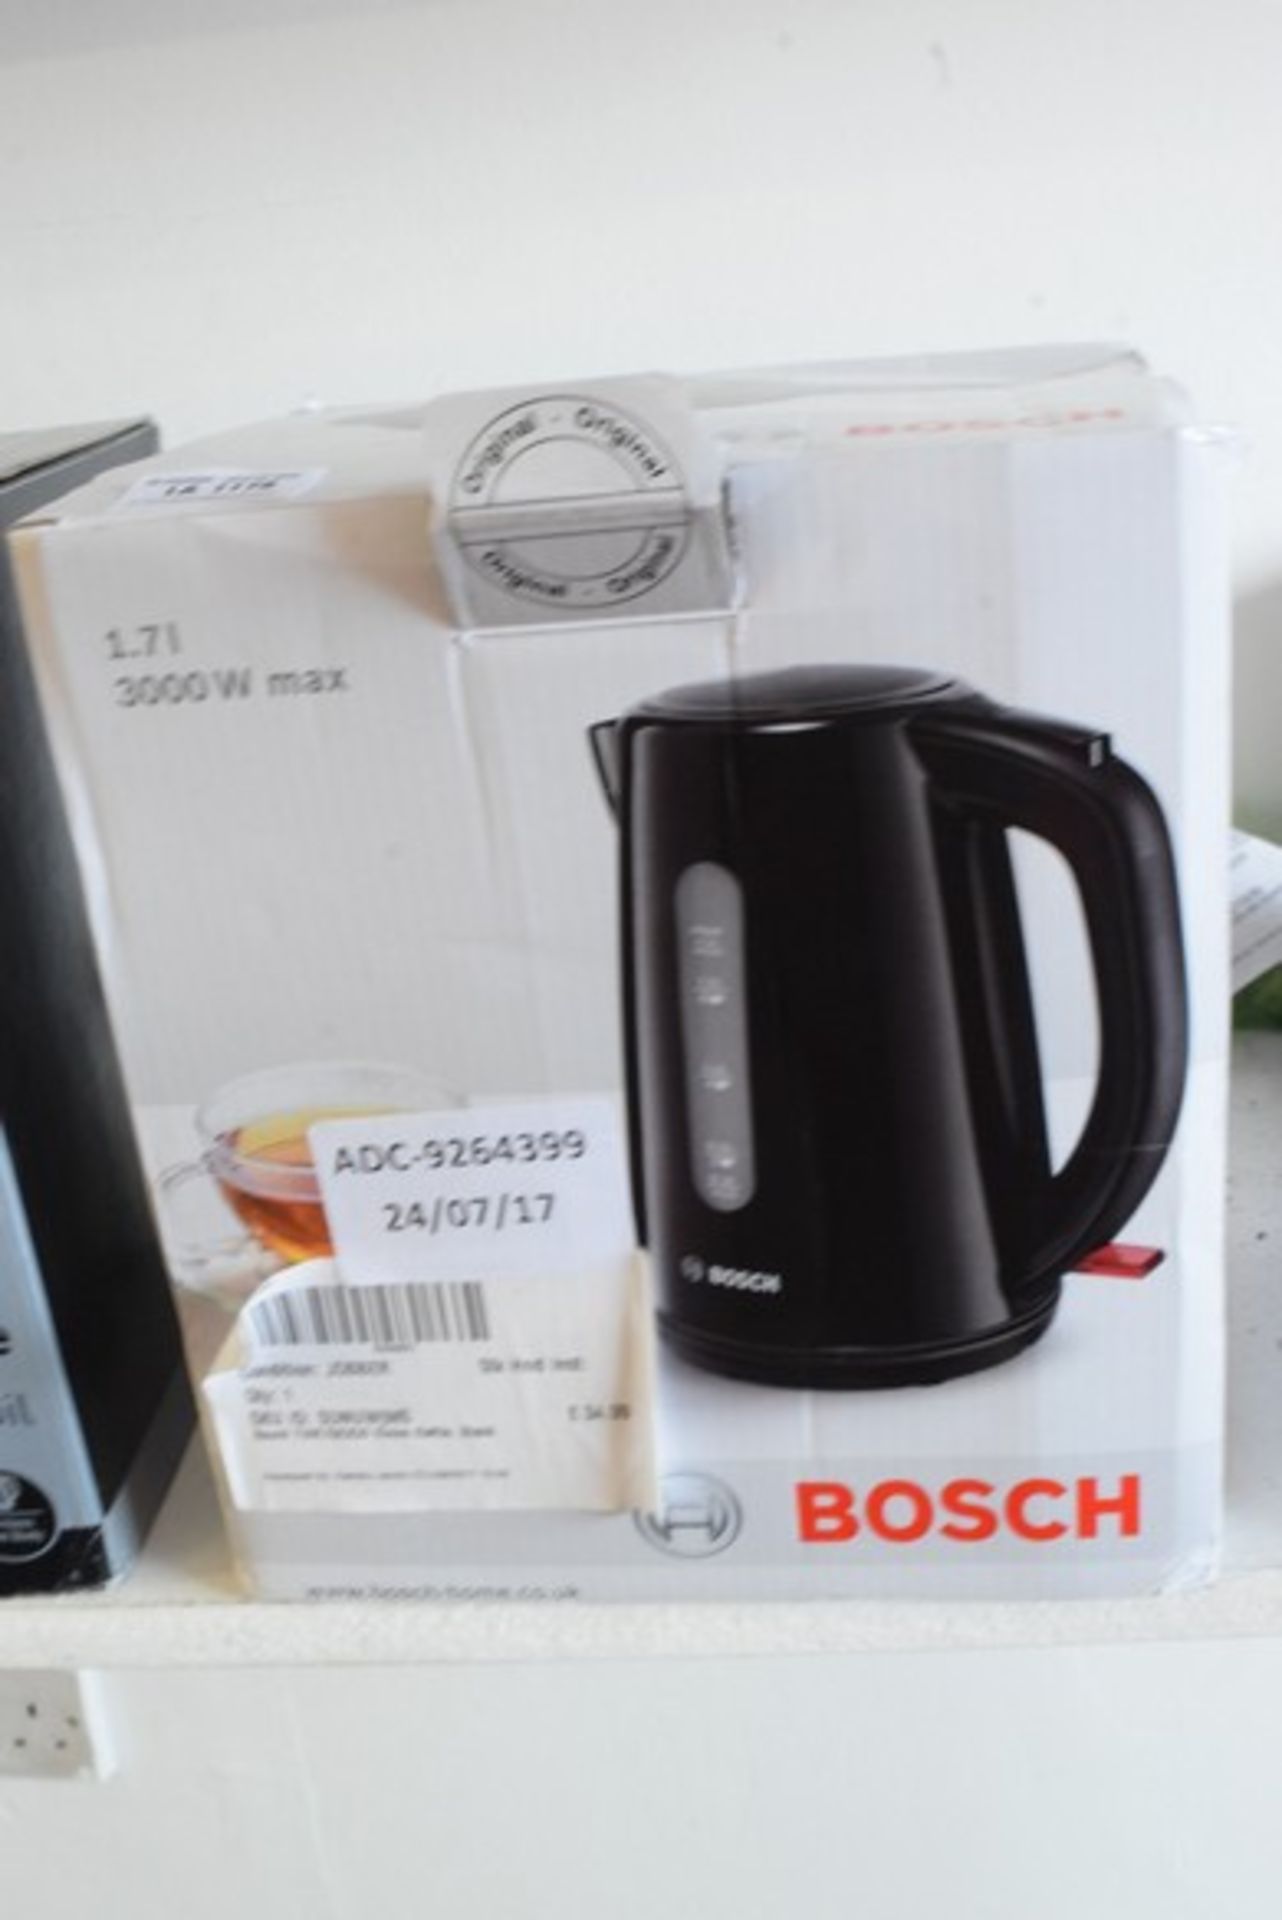 1 x BOSCH VISION KETTLE RRP £35 24/07/17 *PLEASE NOTE THAT THE BID PRICE IS MULTIPLIED BY THE NUMBER